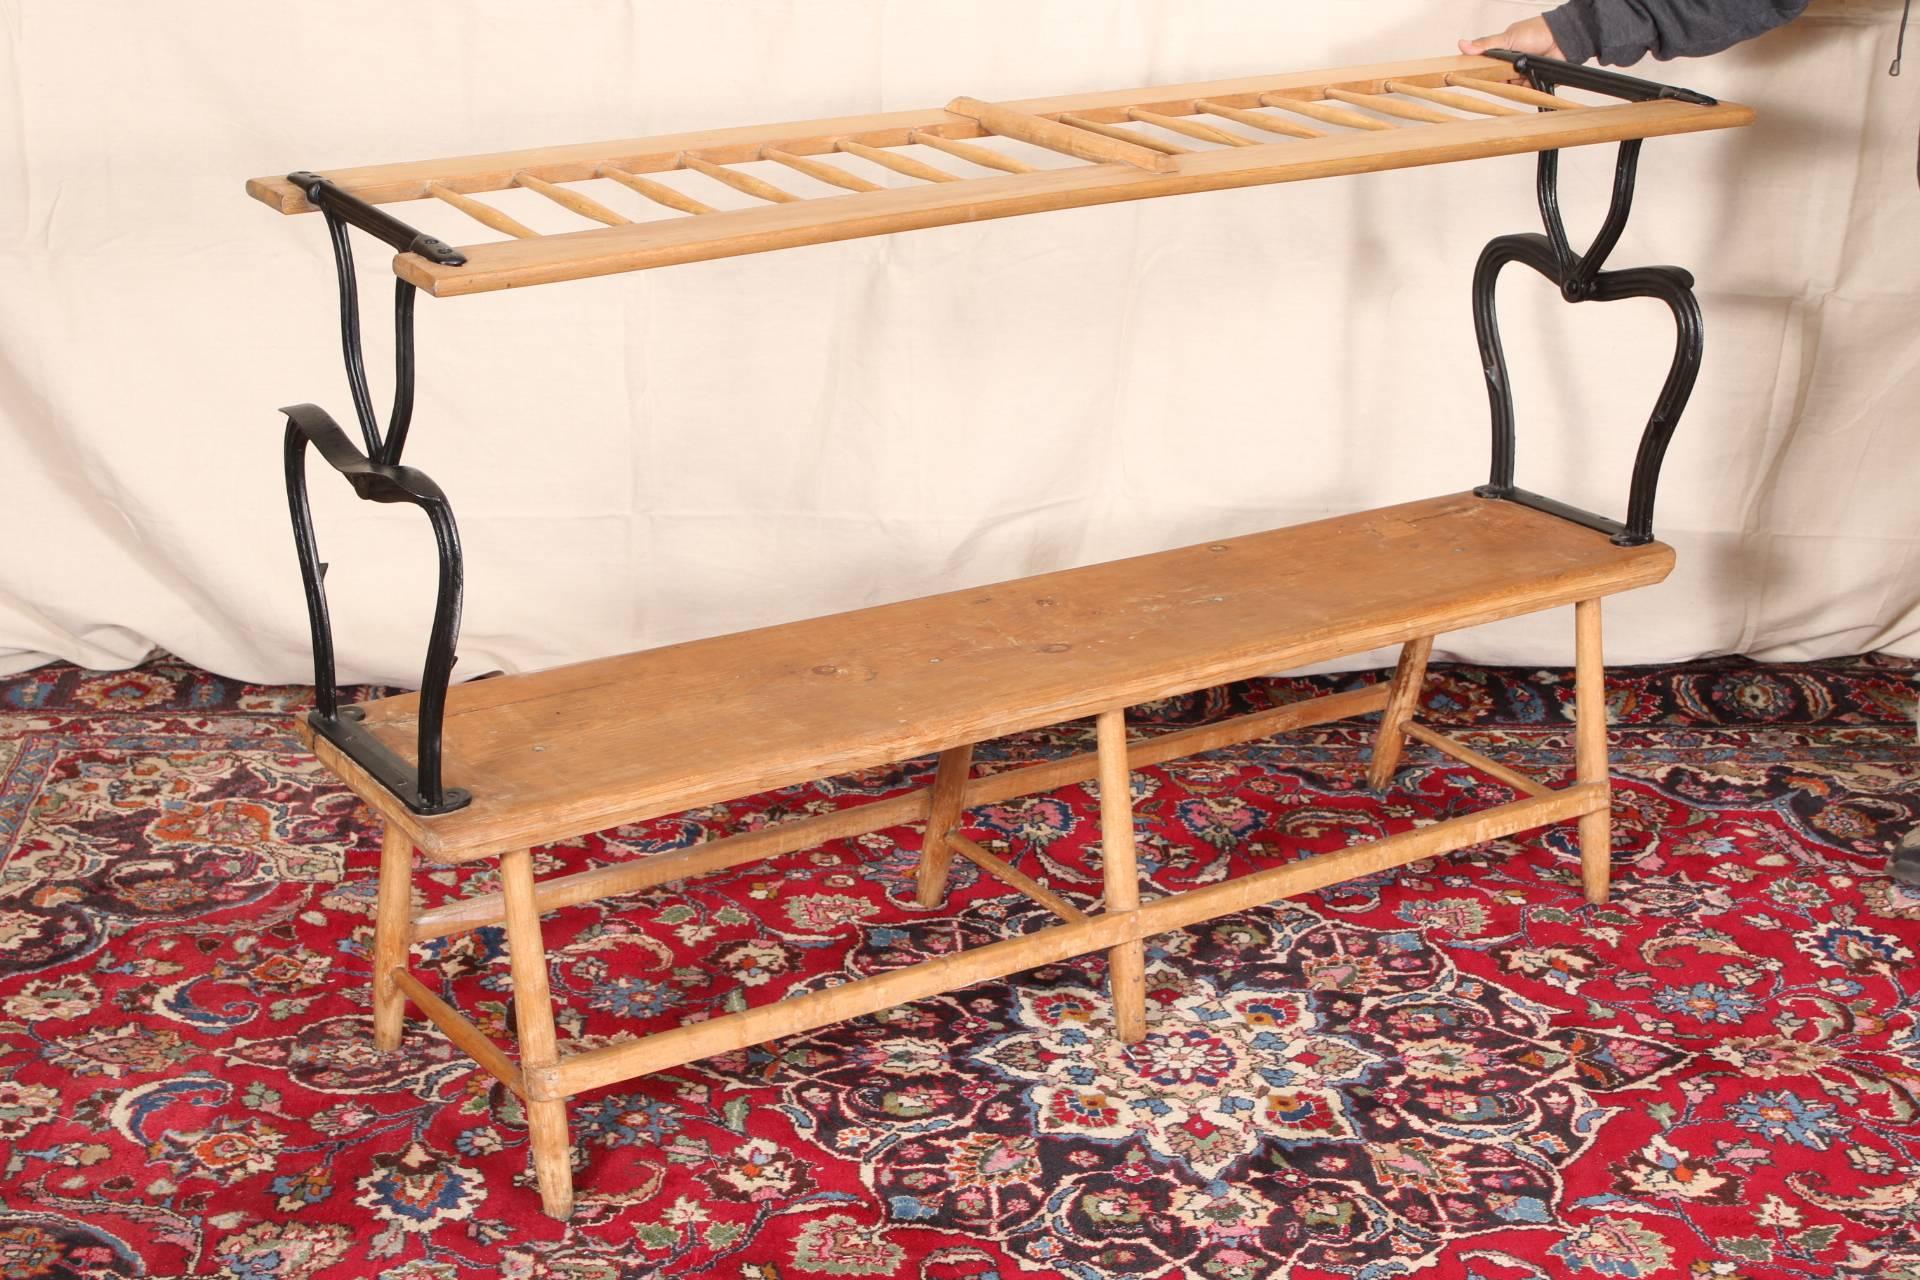 Antique reversible bench, pine, spindle back and black painted iron arms, long stretchers front and back and cross stretchers front to back, raised on splayed cylindrical legs. 

Condition: Expected surface wear and signs of use including some